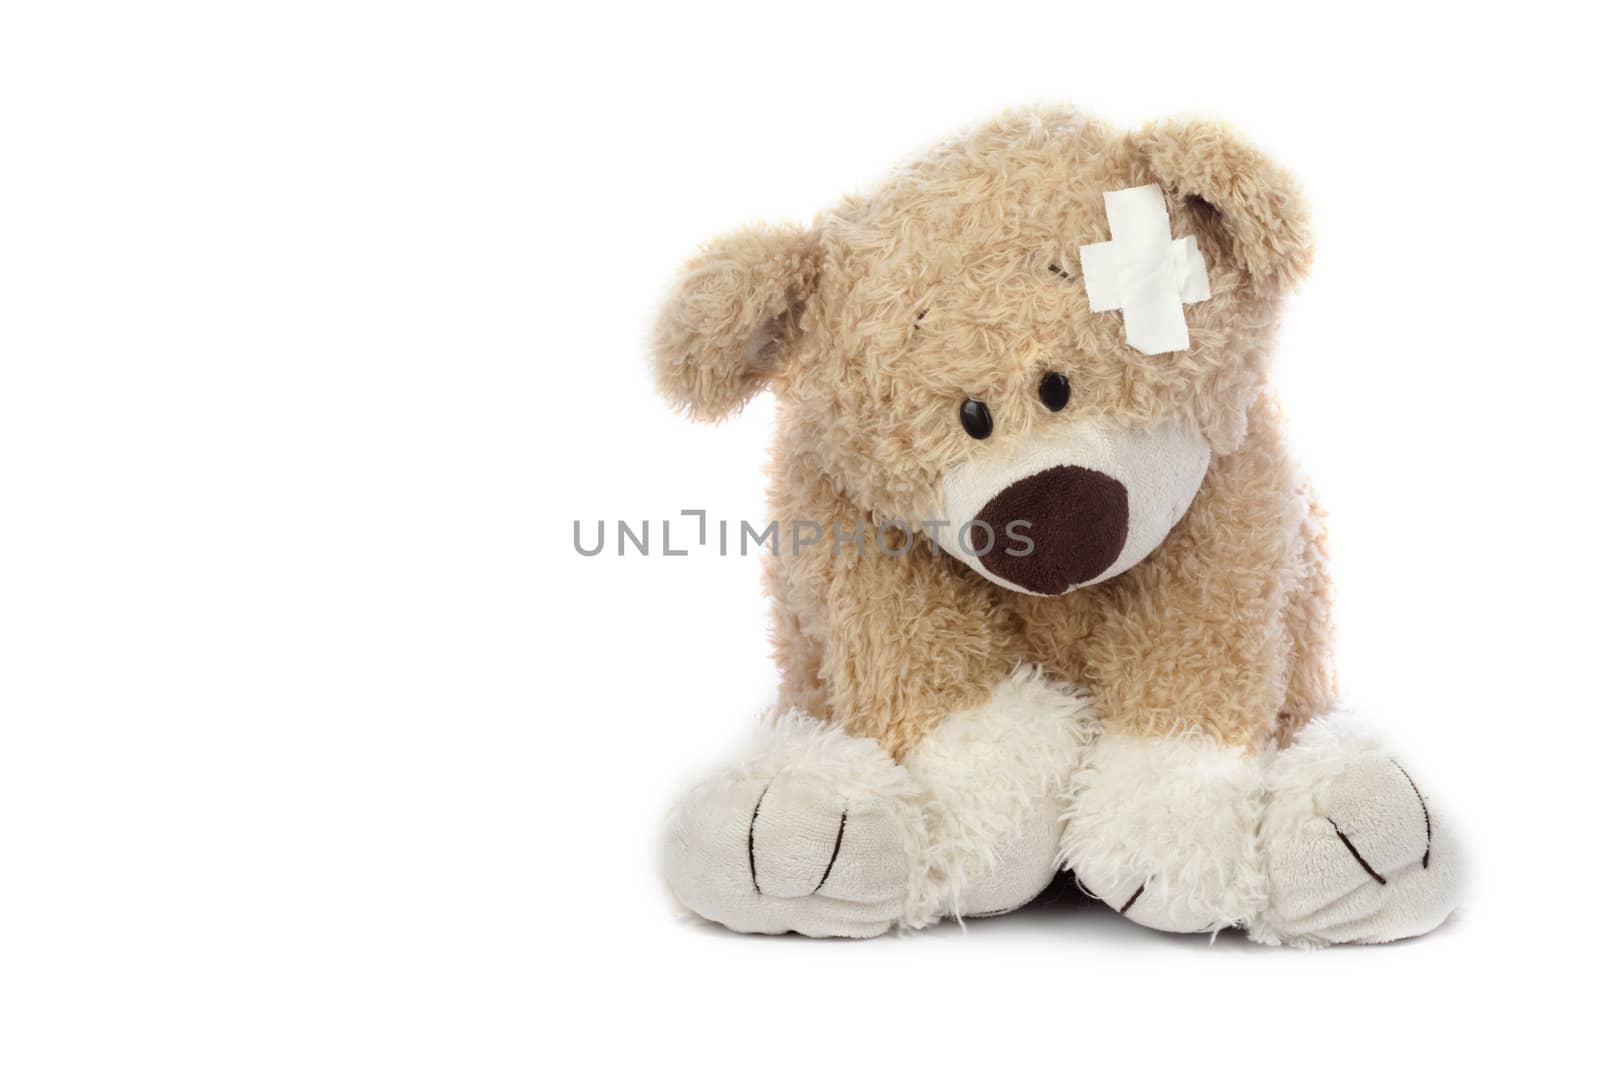 An adorable teddy bear that is sad and hurt.